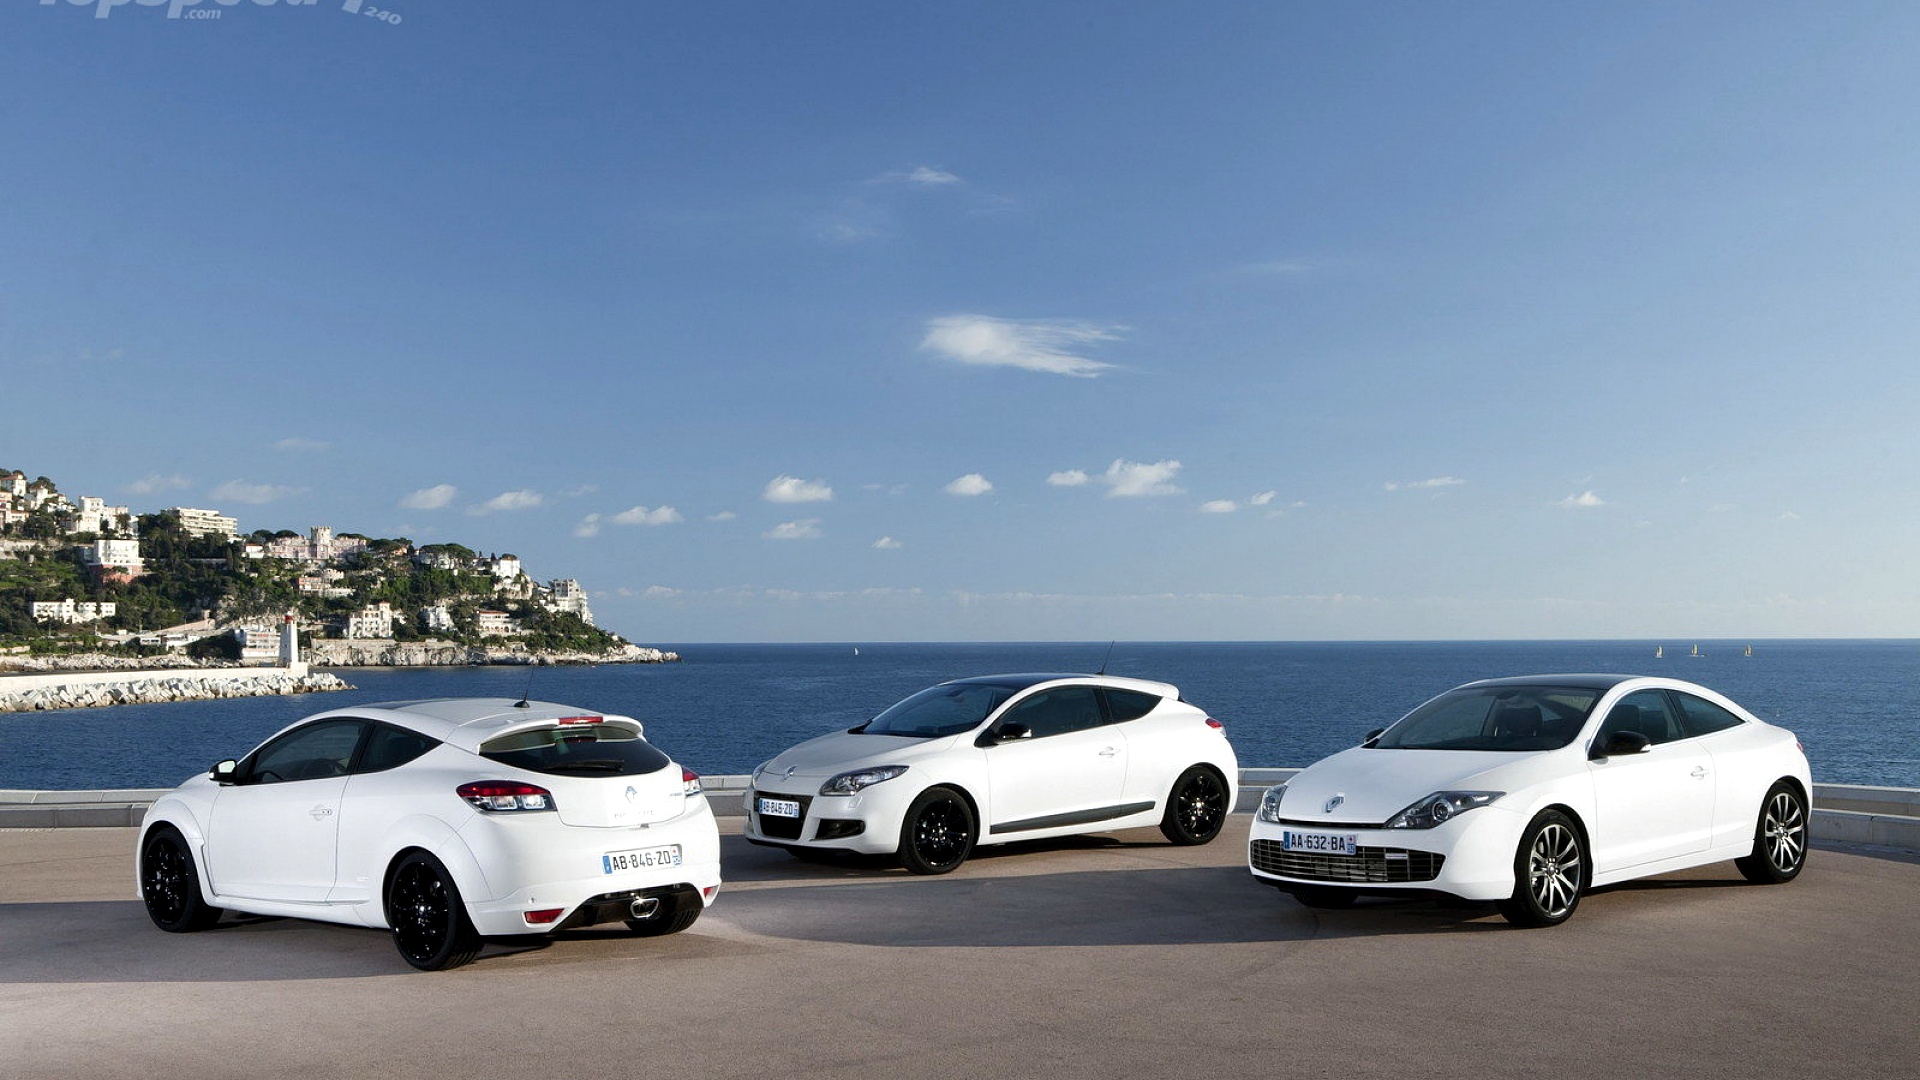 Renault Cars On HD Wallpaper Car With